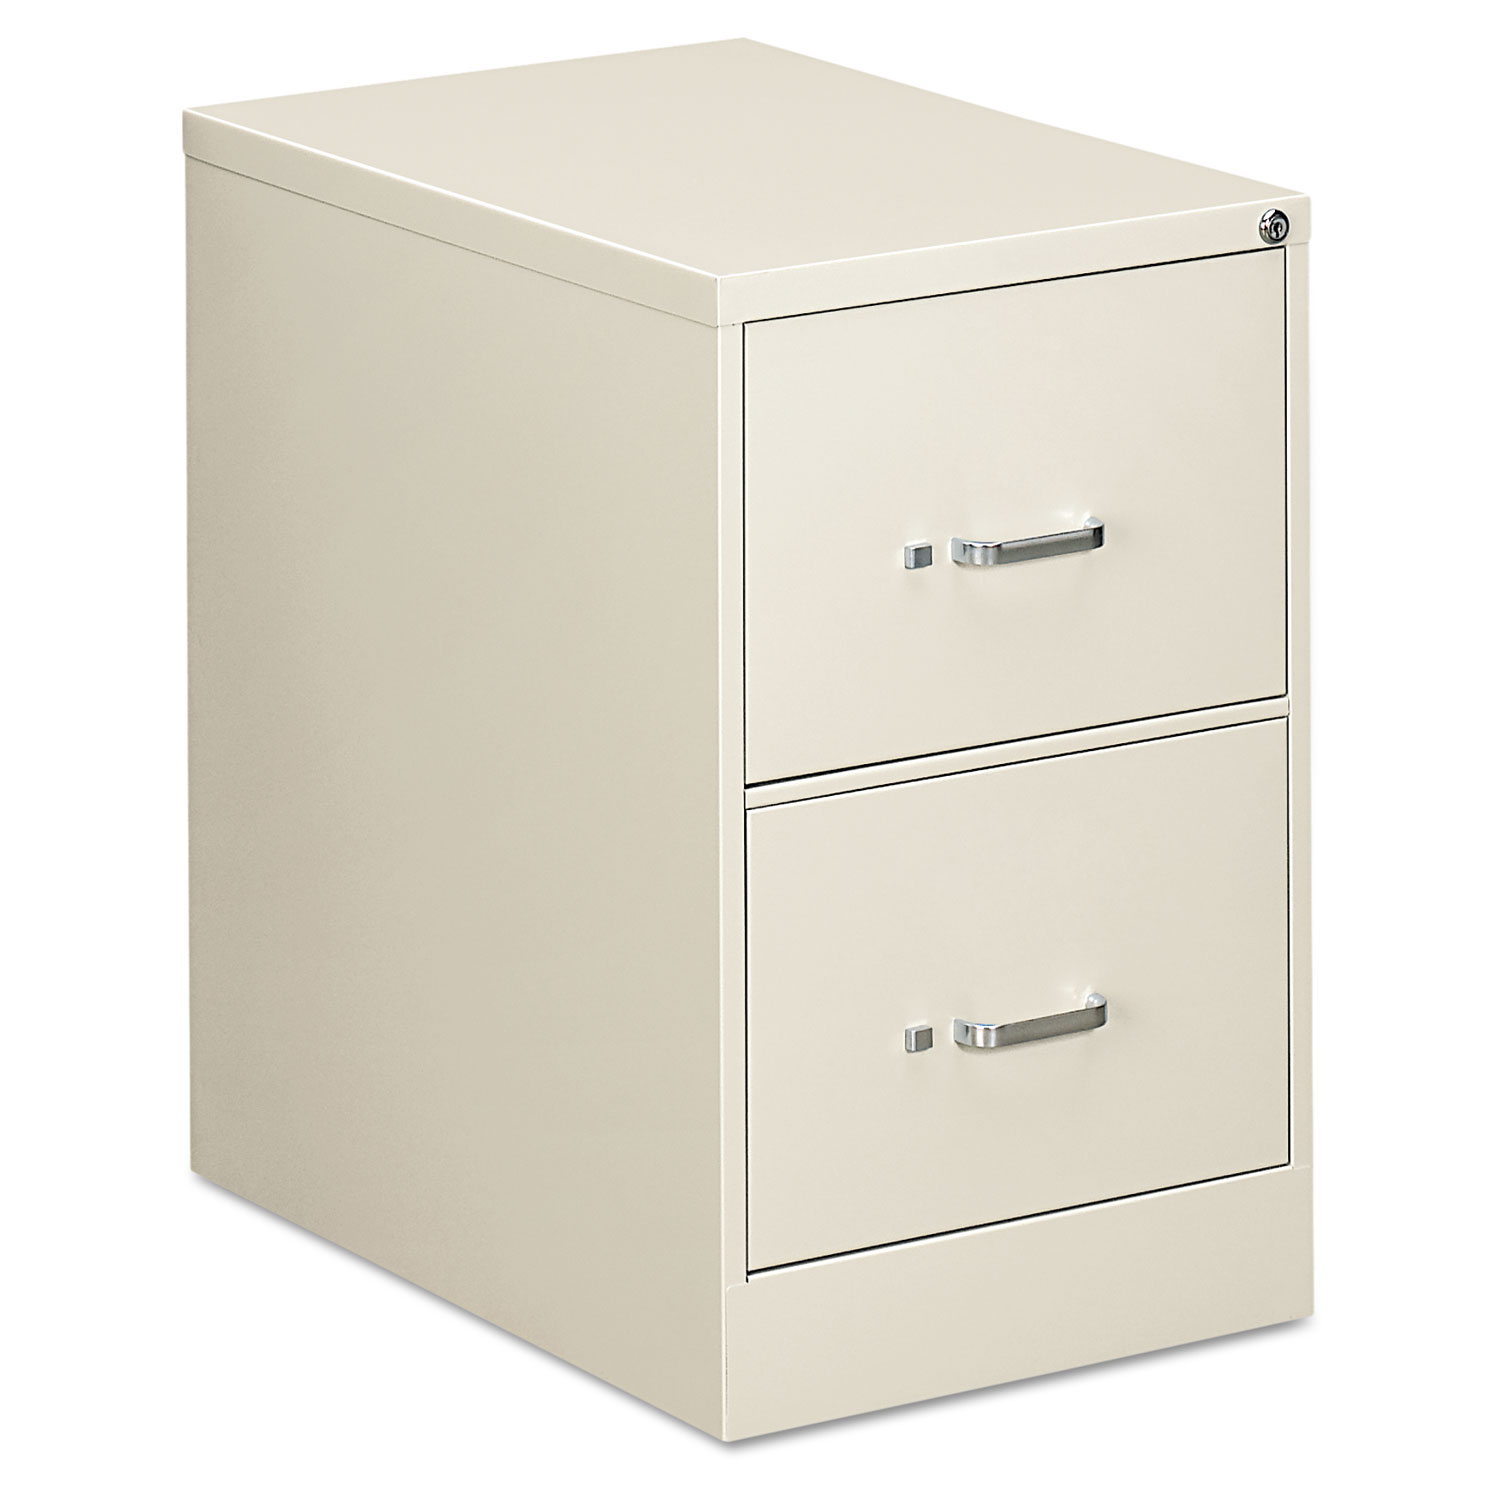 Two-Drawer Economy Vertical File, Legal, 18 1/4w x 26 1/2d x 29h, Light Gray